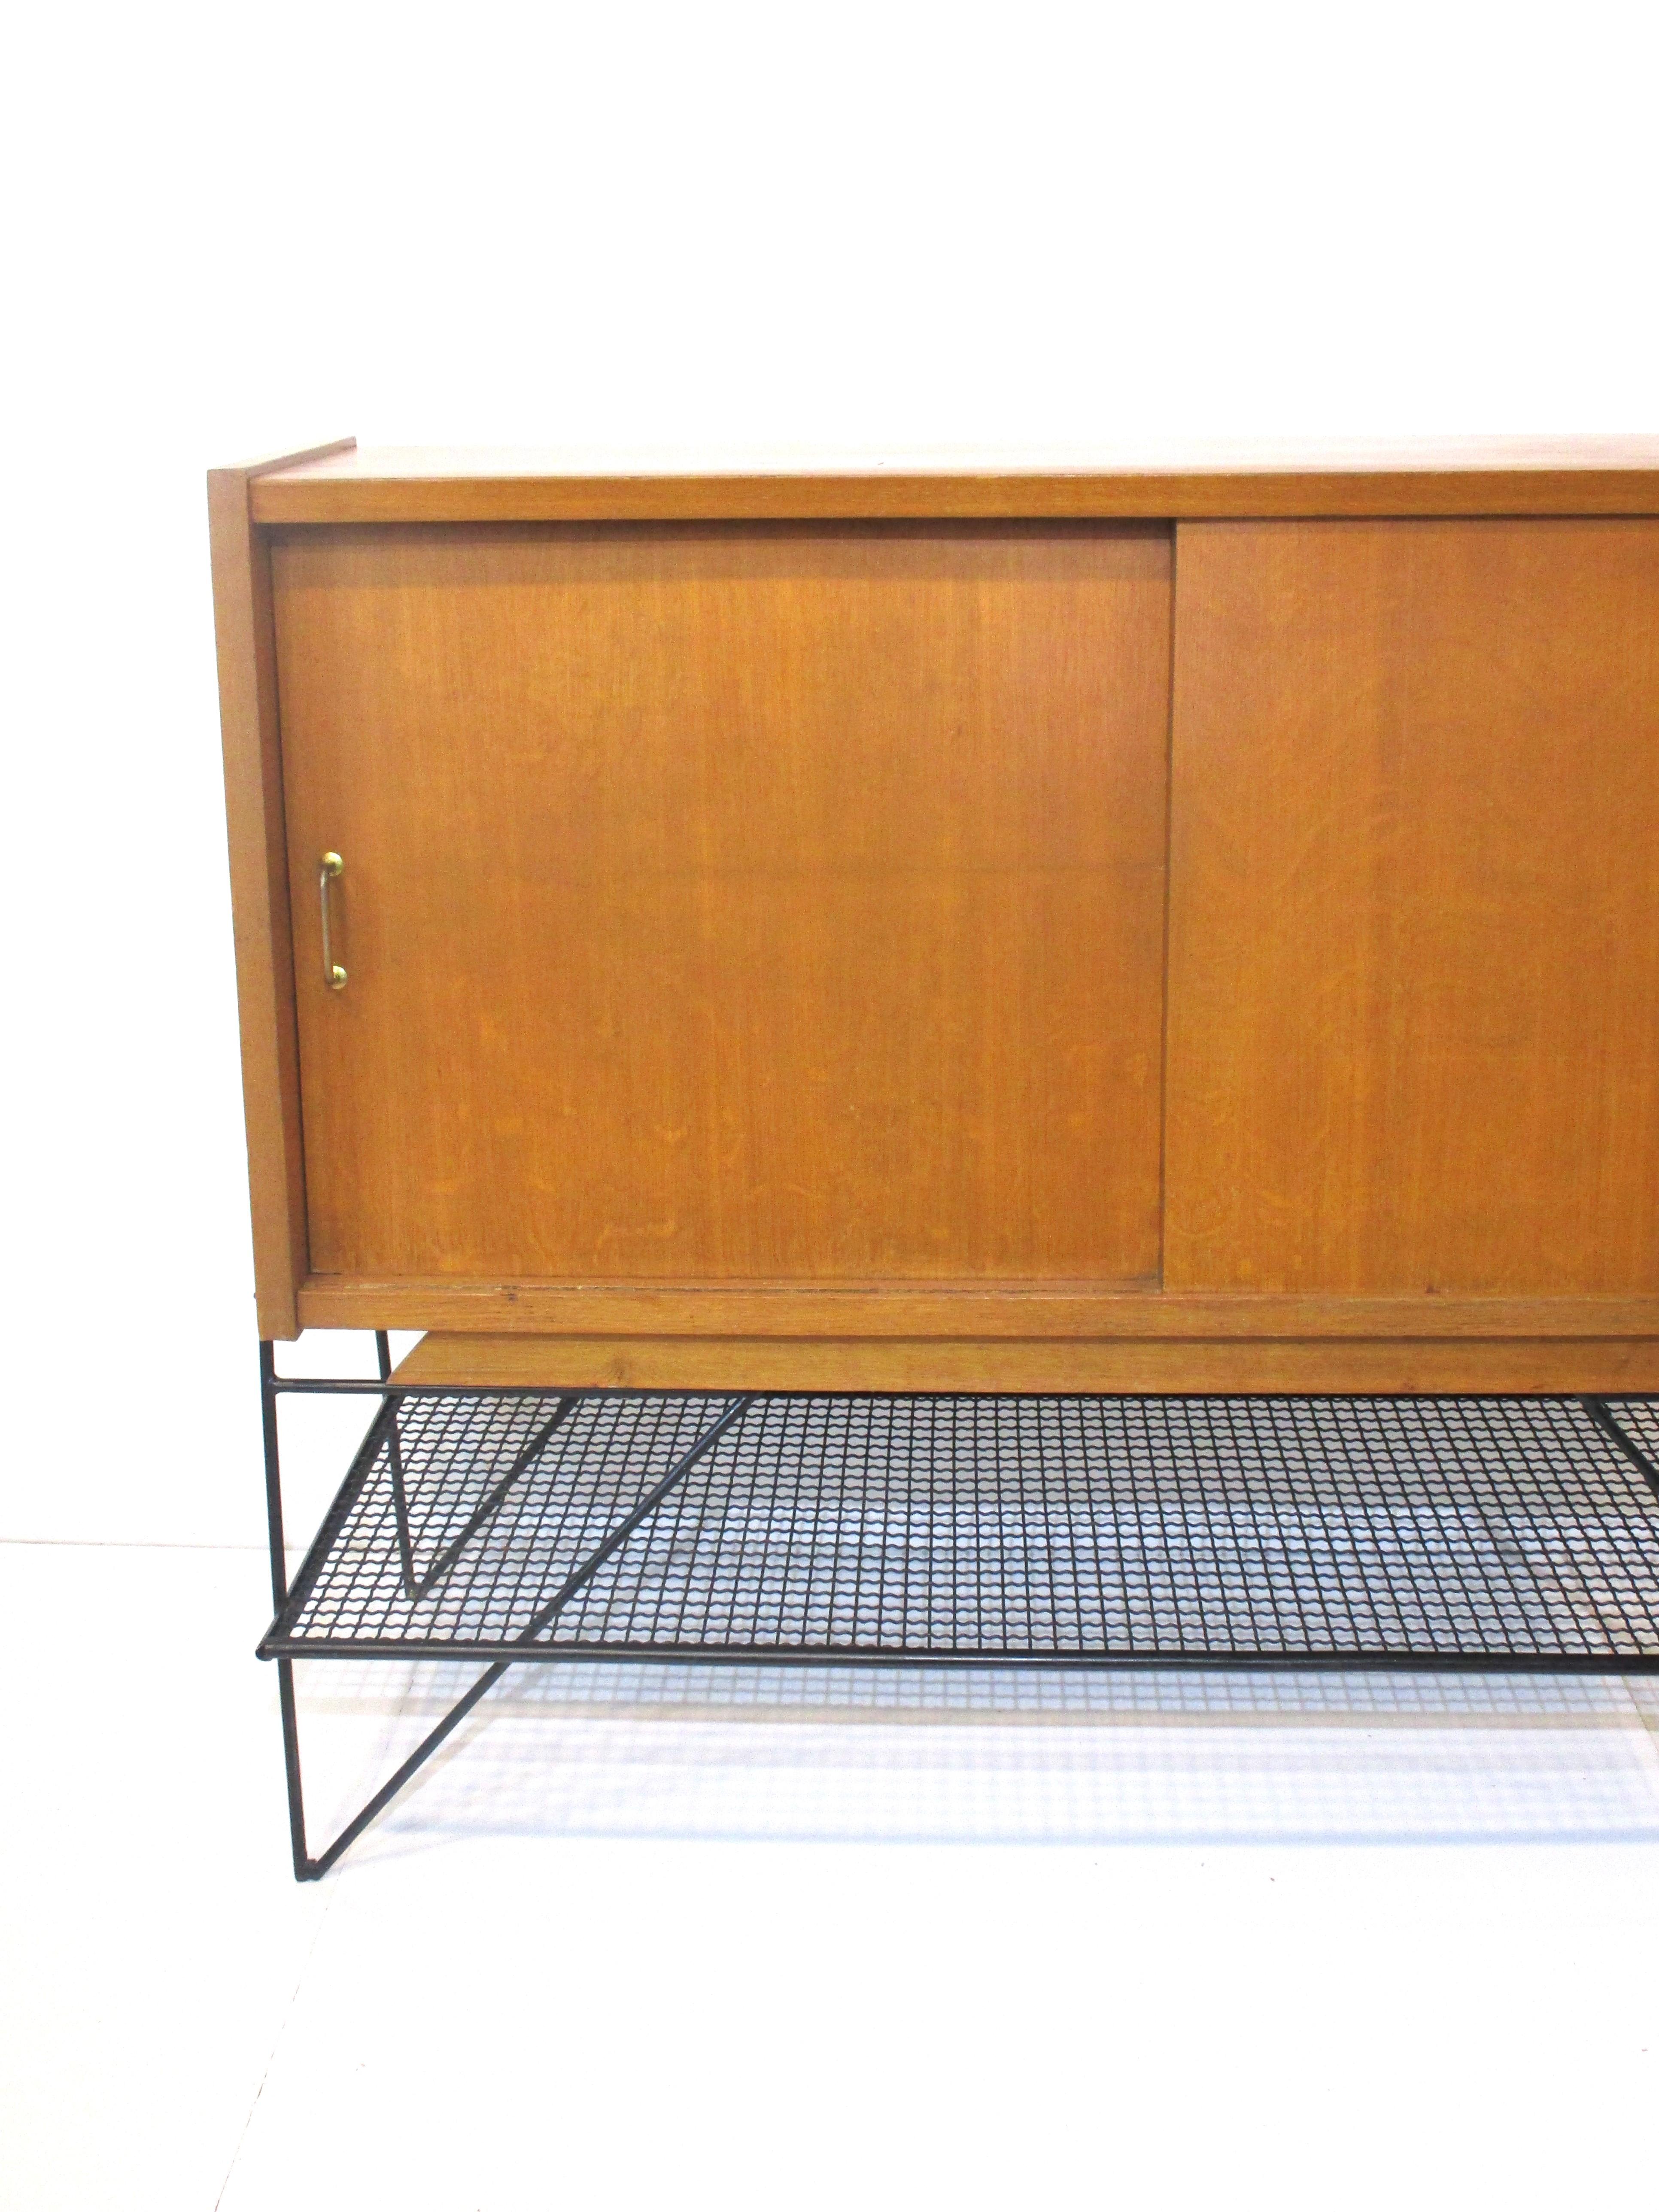 A French oak sliding two door credenza / cabinet with brass pulls one fixed shelve , storage and a small drawer . The cabinet tappers at an angle upwards and sits on a sculptural black iron base with grated lower shelve platform . A nice piece